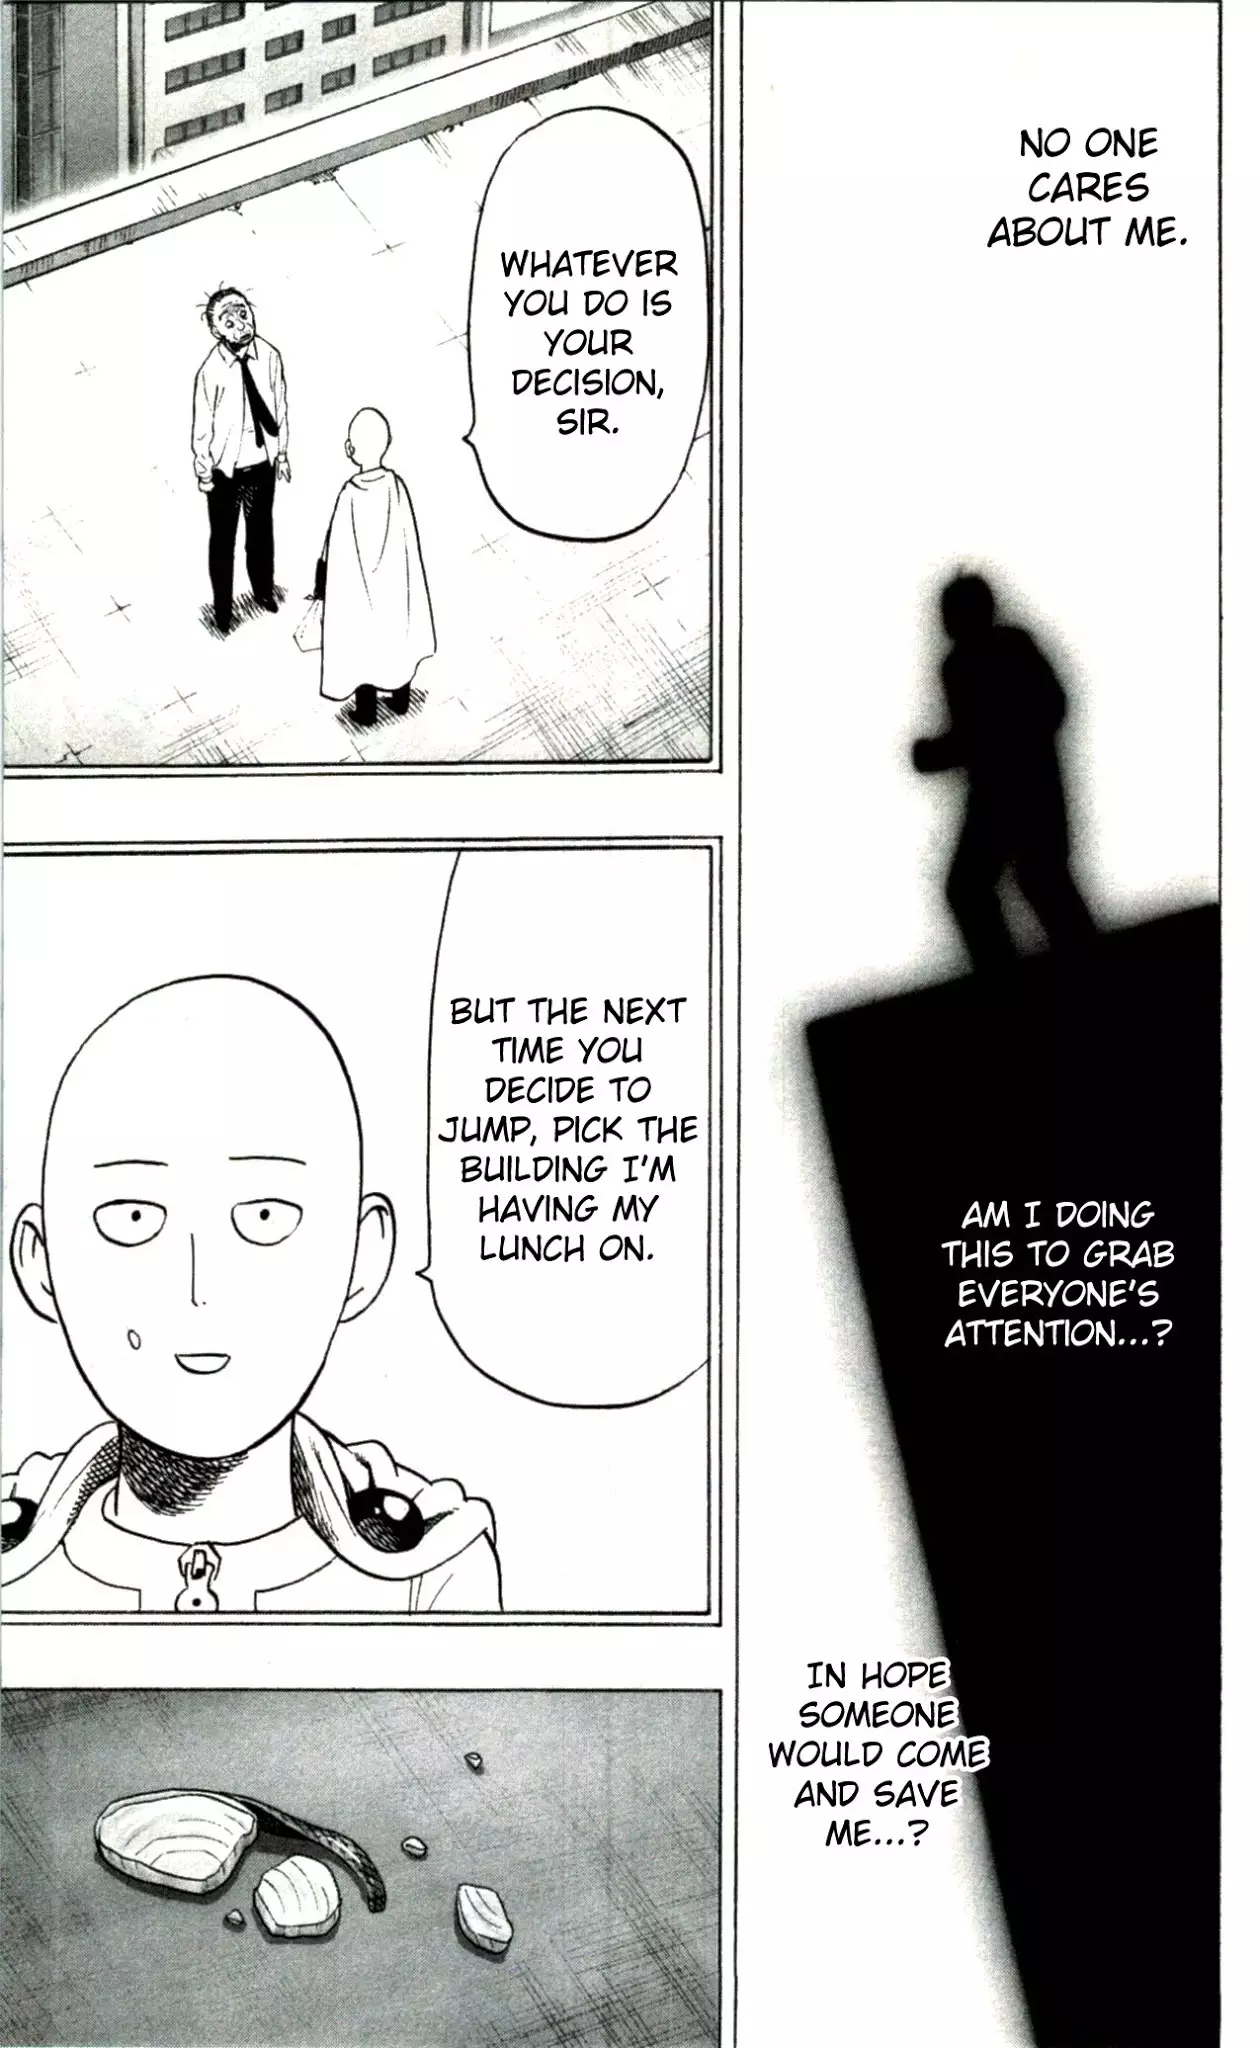 One Punch Man Chapter 34.1, READ One Punch Man Chapter 34.1 ONLINE, lost in the cloud genre,lost in the cloud gif,lost in the cloud girl,lost in the cloud goods,lost in the cloud goodreads,lost in the cloud,lost ark cloud gaming,lost odyssey cloud gaming,lost in the cloud fanart,lost in the cloud fanfic,lost in the cloud fandom,lost in the cloud first kiss,lost in the cloud font,lost in the cloud ending,lost in the cloud episode 97,lost in the cloud edit,lost in the cloud explained,lost in the cloud dog,lost in the cloud discord server,lost in the cloud desktop wallpaper,lost in the cloud drawing,can't find my cloud on network,lost in the cloud characters,lost in the cloud chapter 93 release date,lost in the cloud birthday,lost in the cloud birthday art,lost in the cloud background,lost in the cloud banner,lost in the clouds meaning,what is the black cloud in lost,lost in the cloud ao3,lost in the cloud anime,lost in the cloud art,lost in the cloud author twitter,lost in the cloud author instagram,lost in the cloud artist,lost in the cloud acrylic stand,lost in the cloud artist twitter,lost in the cloud art style,lost in the cloud analysis